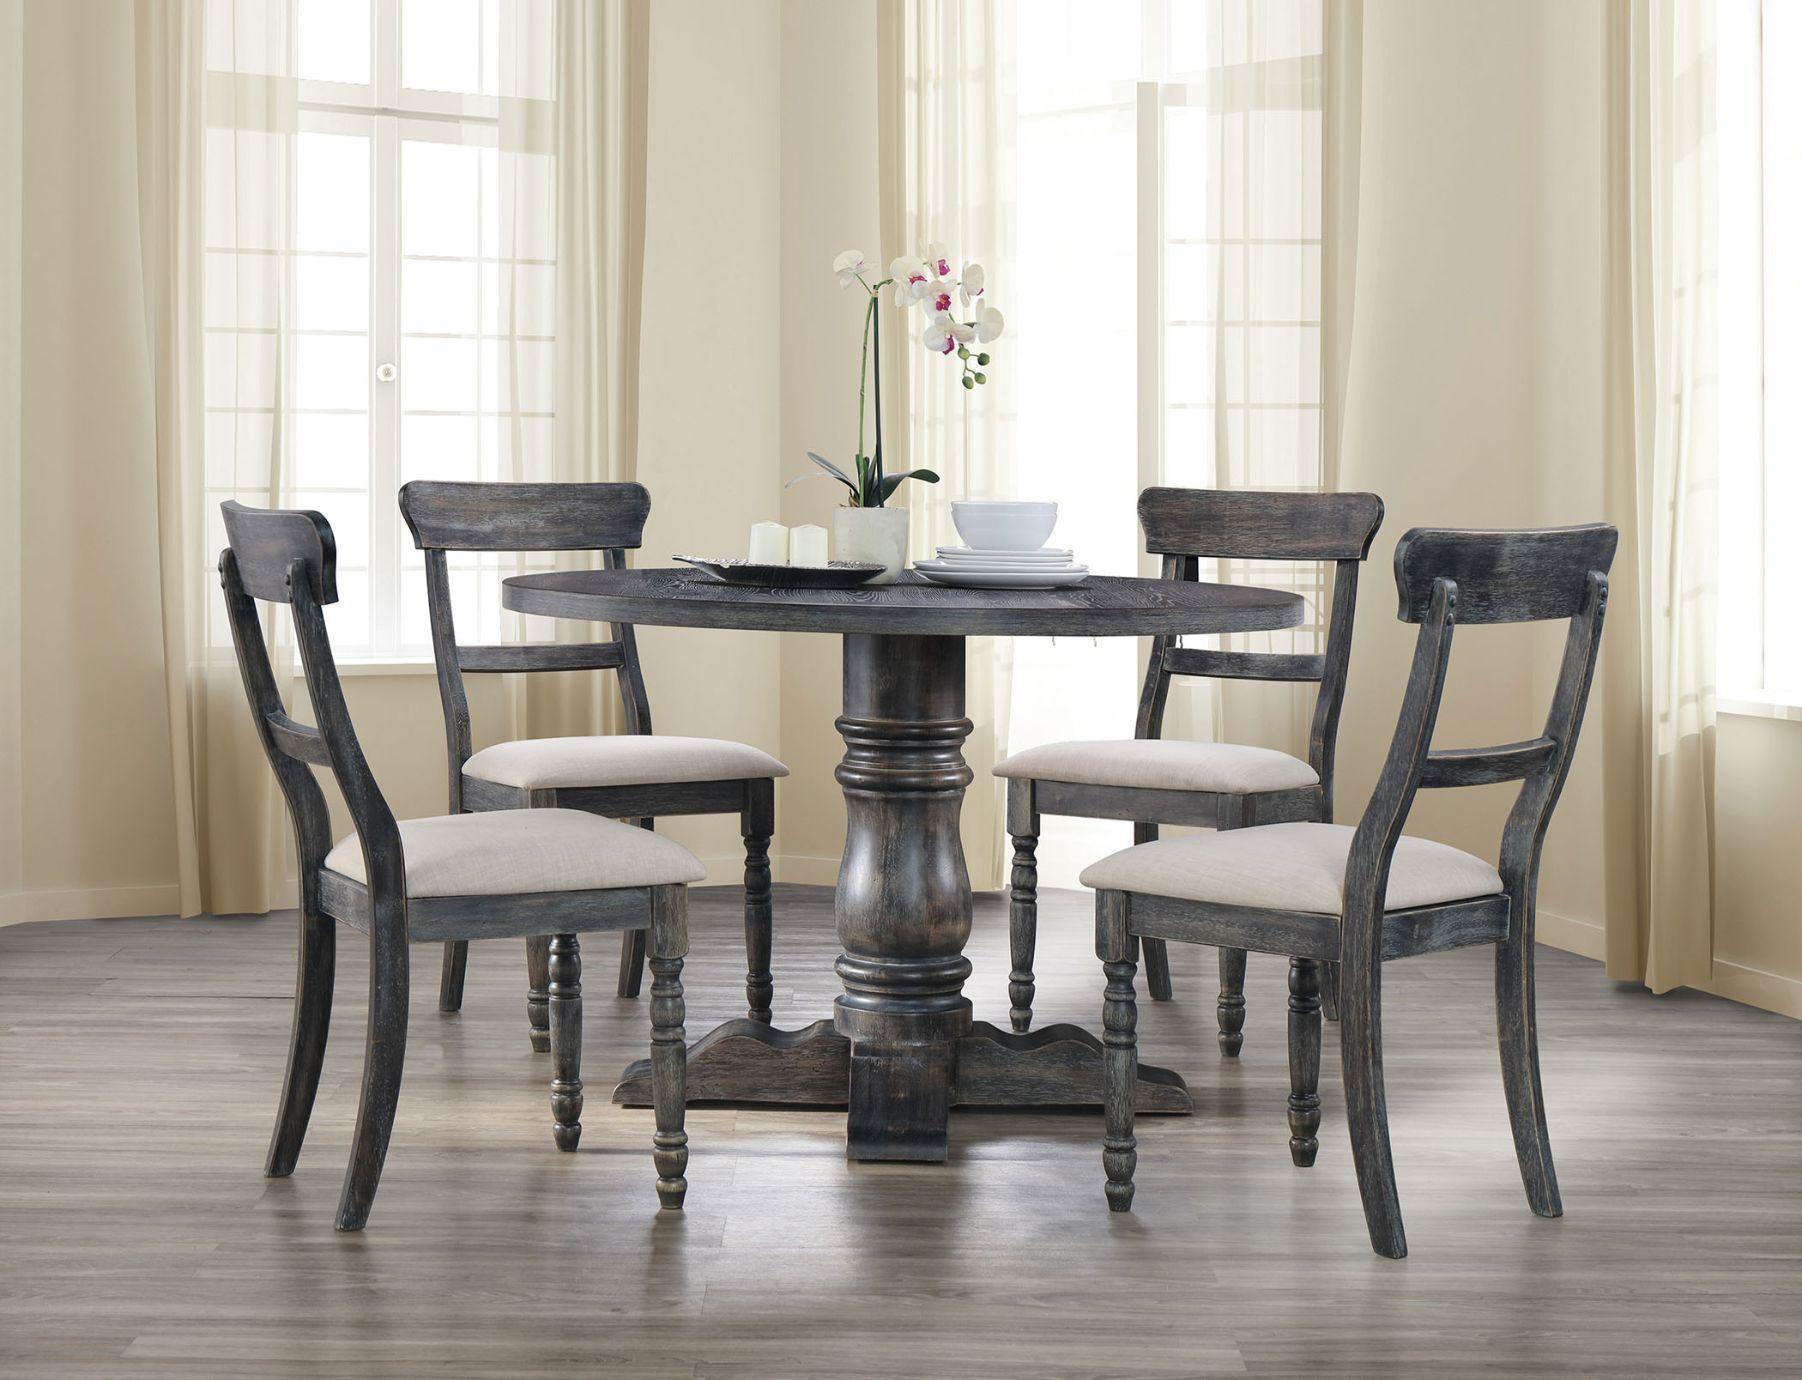 

    
Rustic Weathered Gray Dining Room Set by Acme Leventis 74640-5pcs
